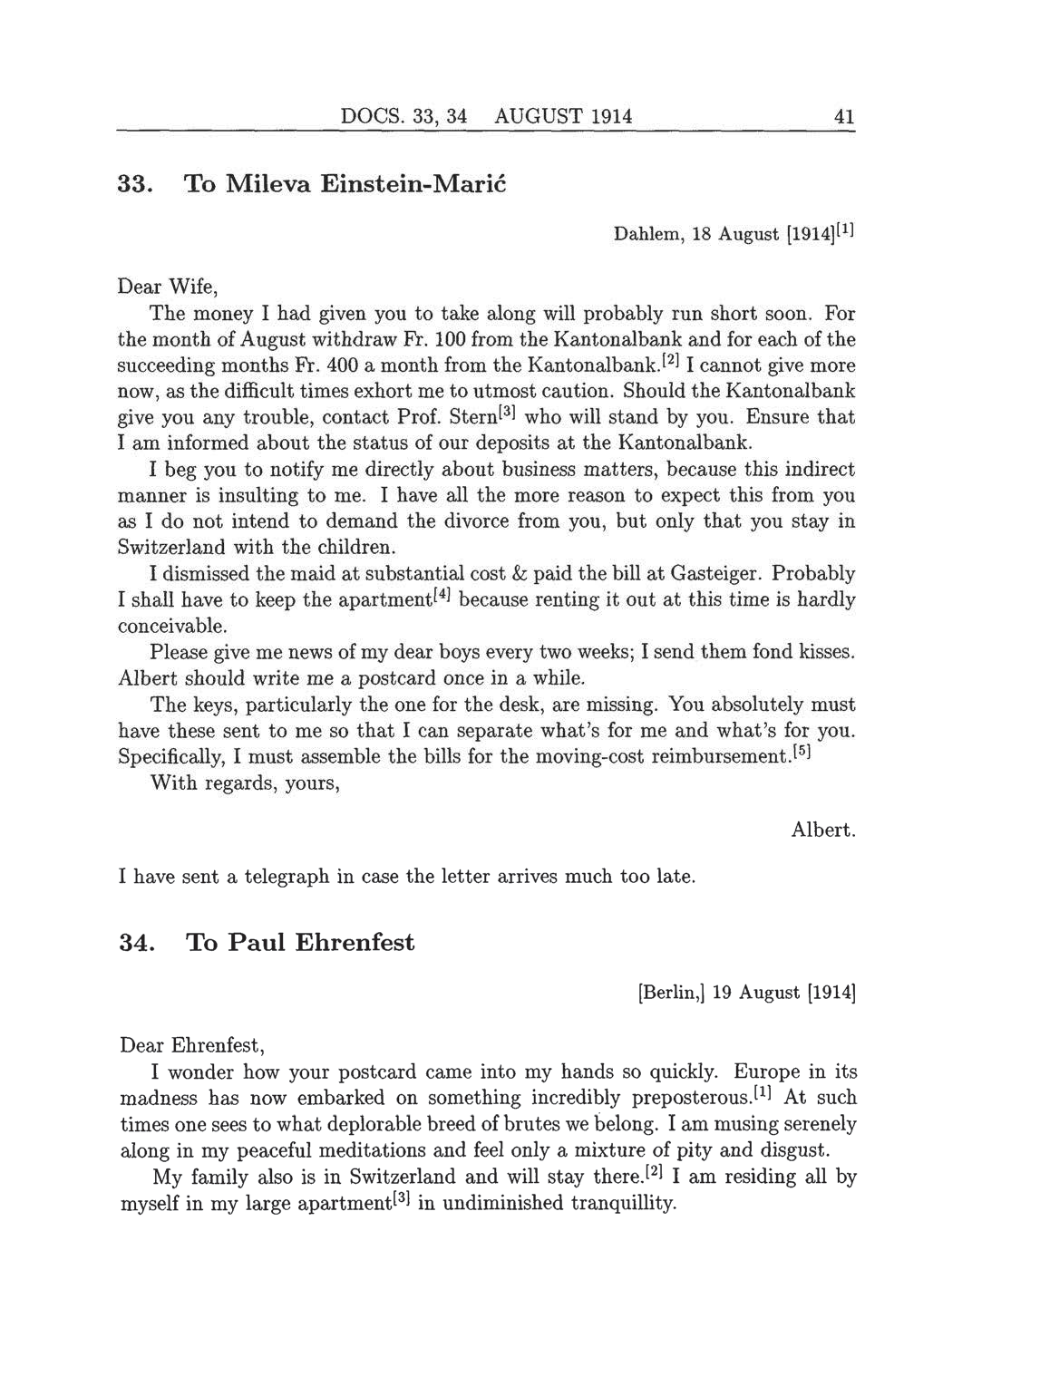 Volume 8: The Berlin Years: Correspondence, 1914-1918 (English translation supplement) page 41